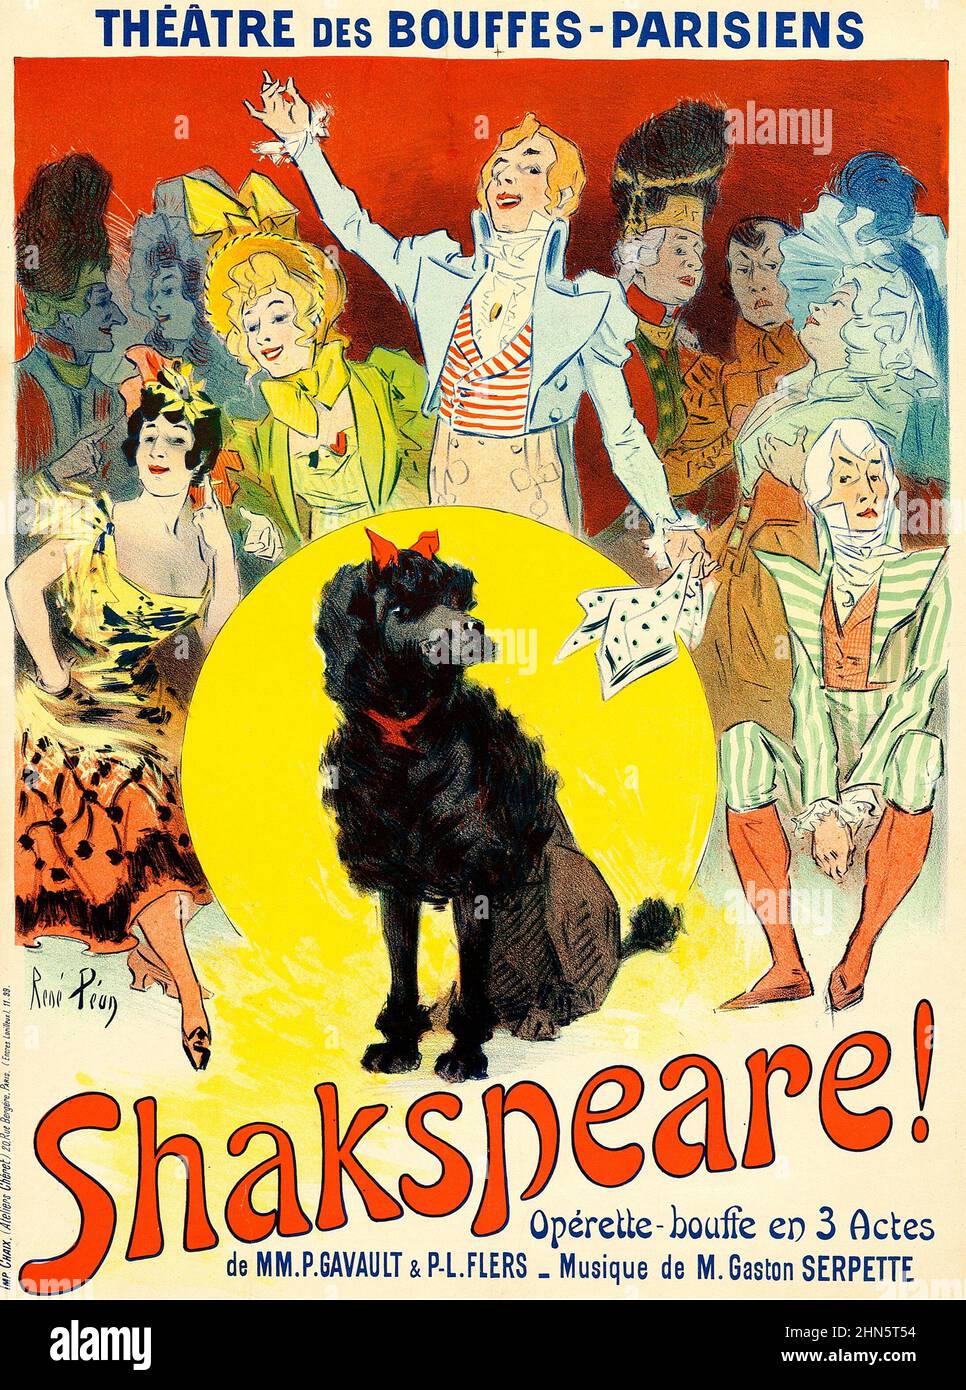 Shakespeare! (Spelled Shakspeare! on this poster) c.1899. French Operetta Affiche. Stock Photo